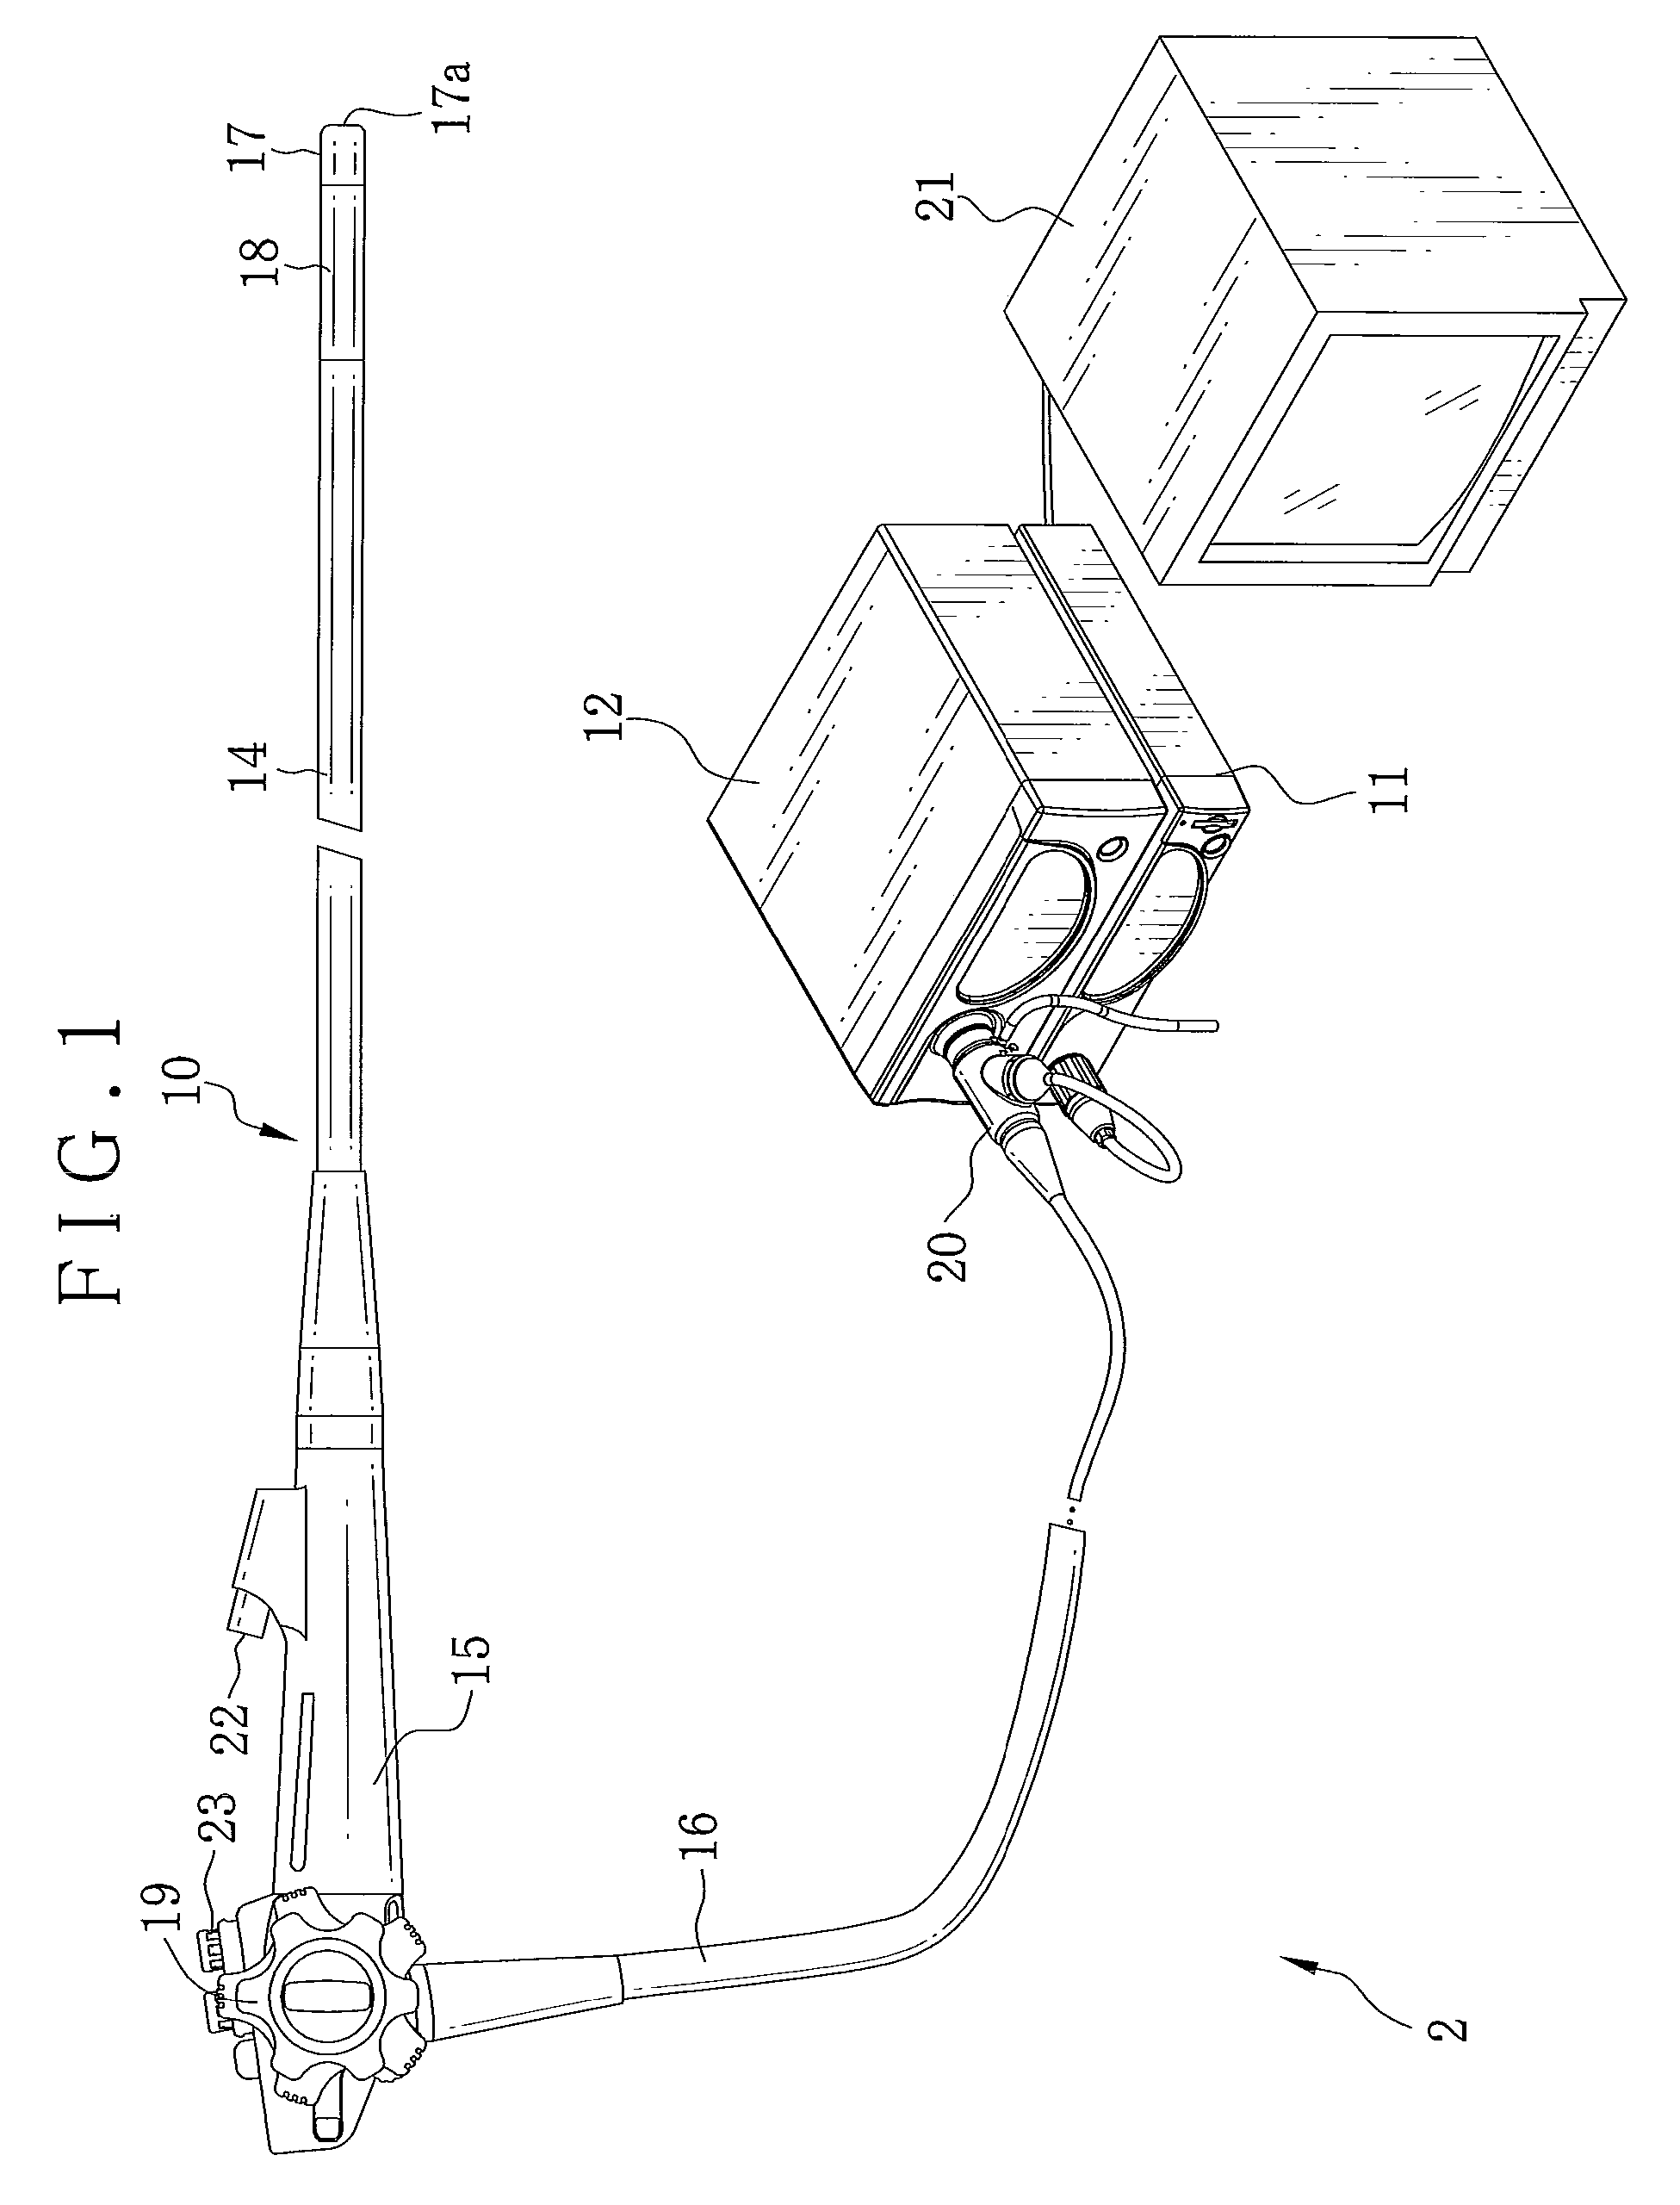 Image pickup system and endoscope system